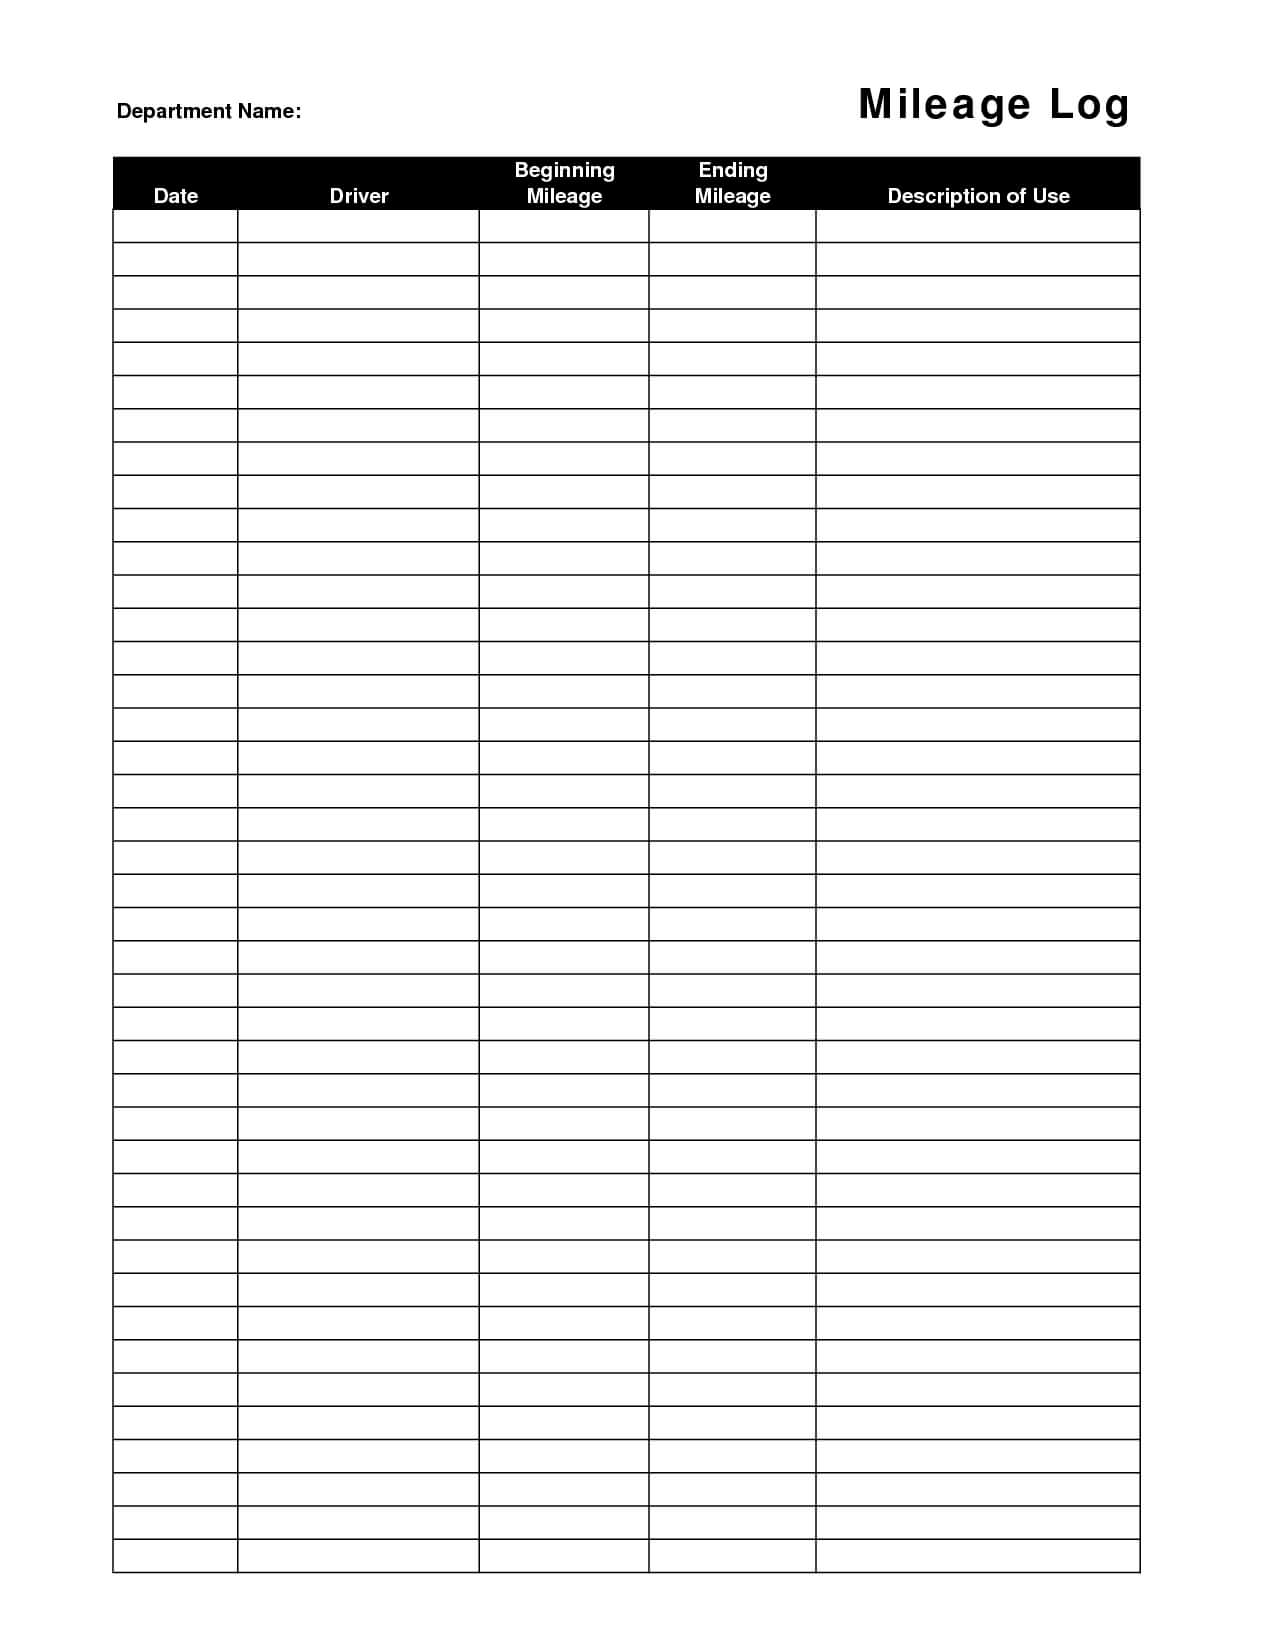 gas-mileage-expense-report-template